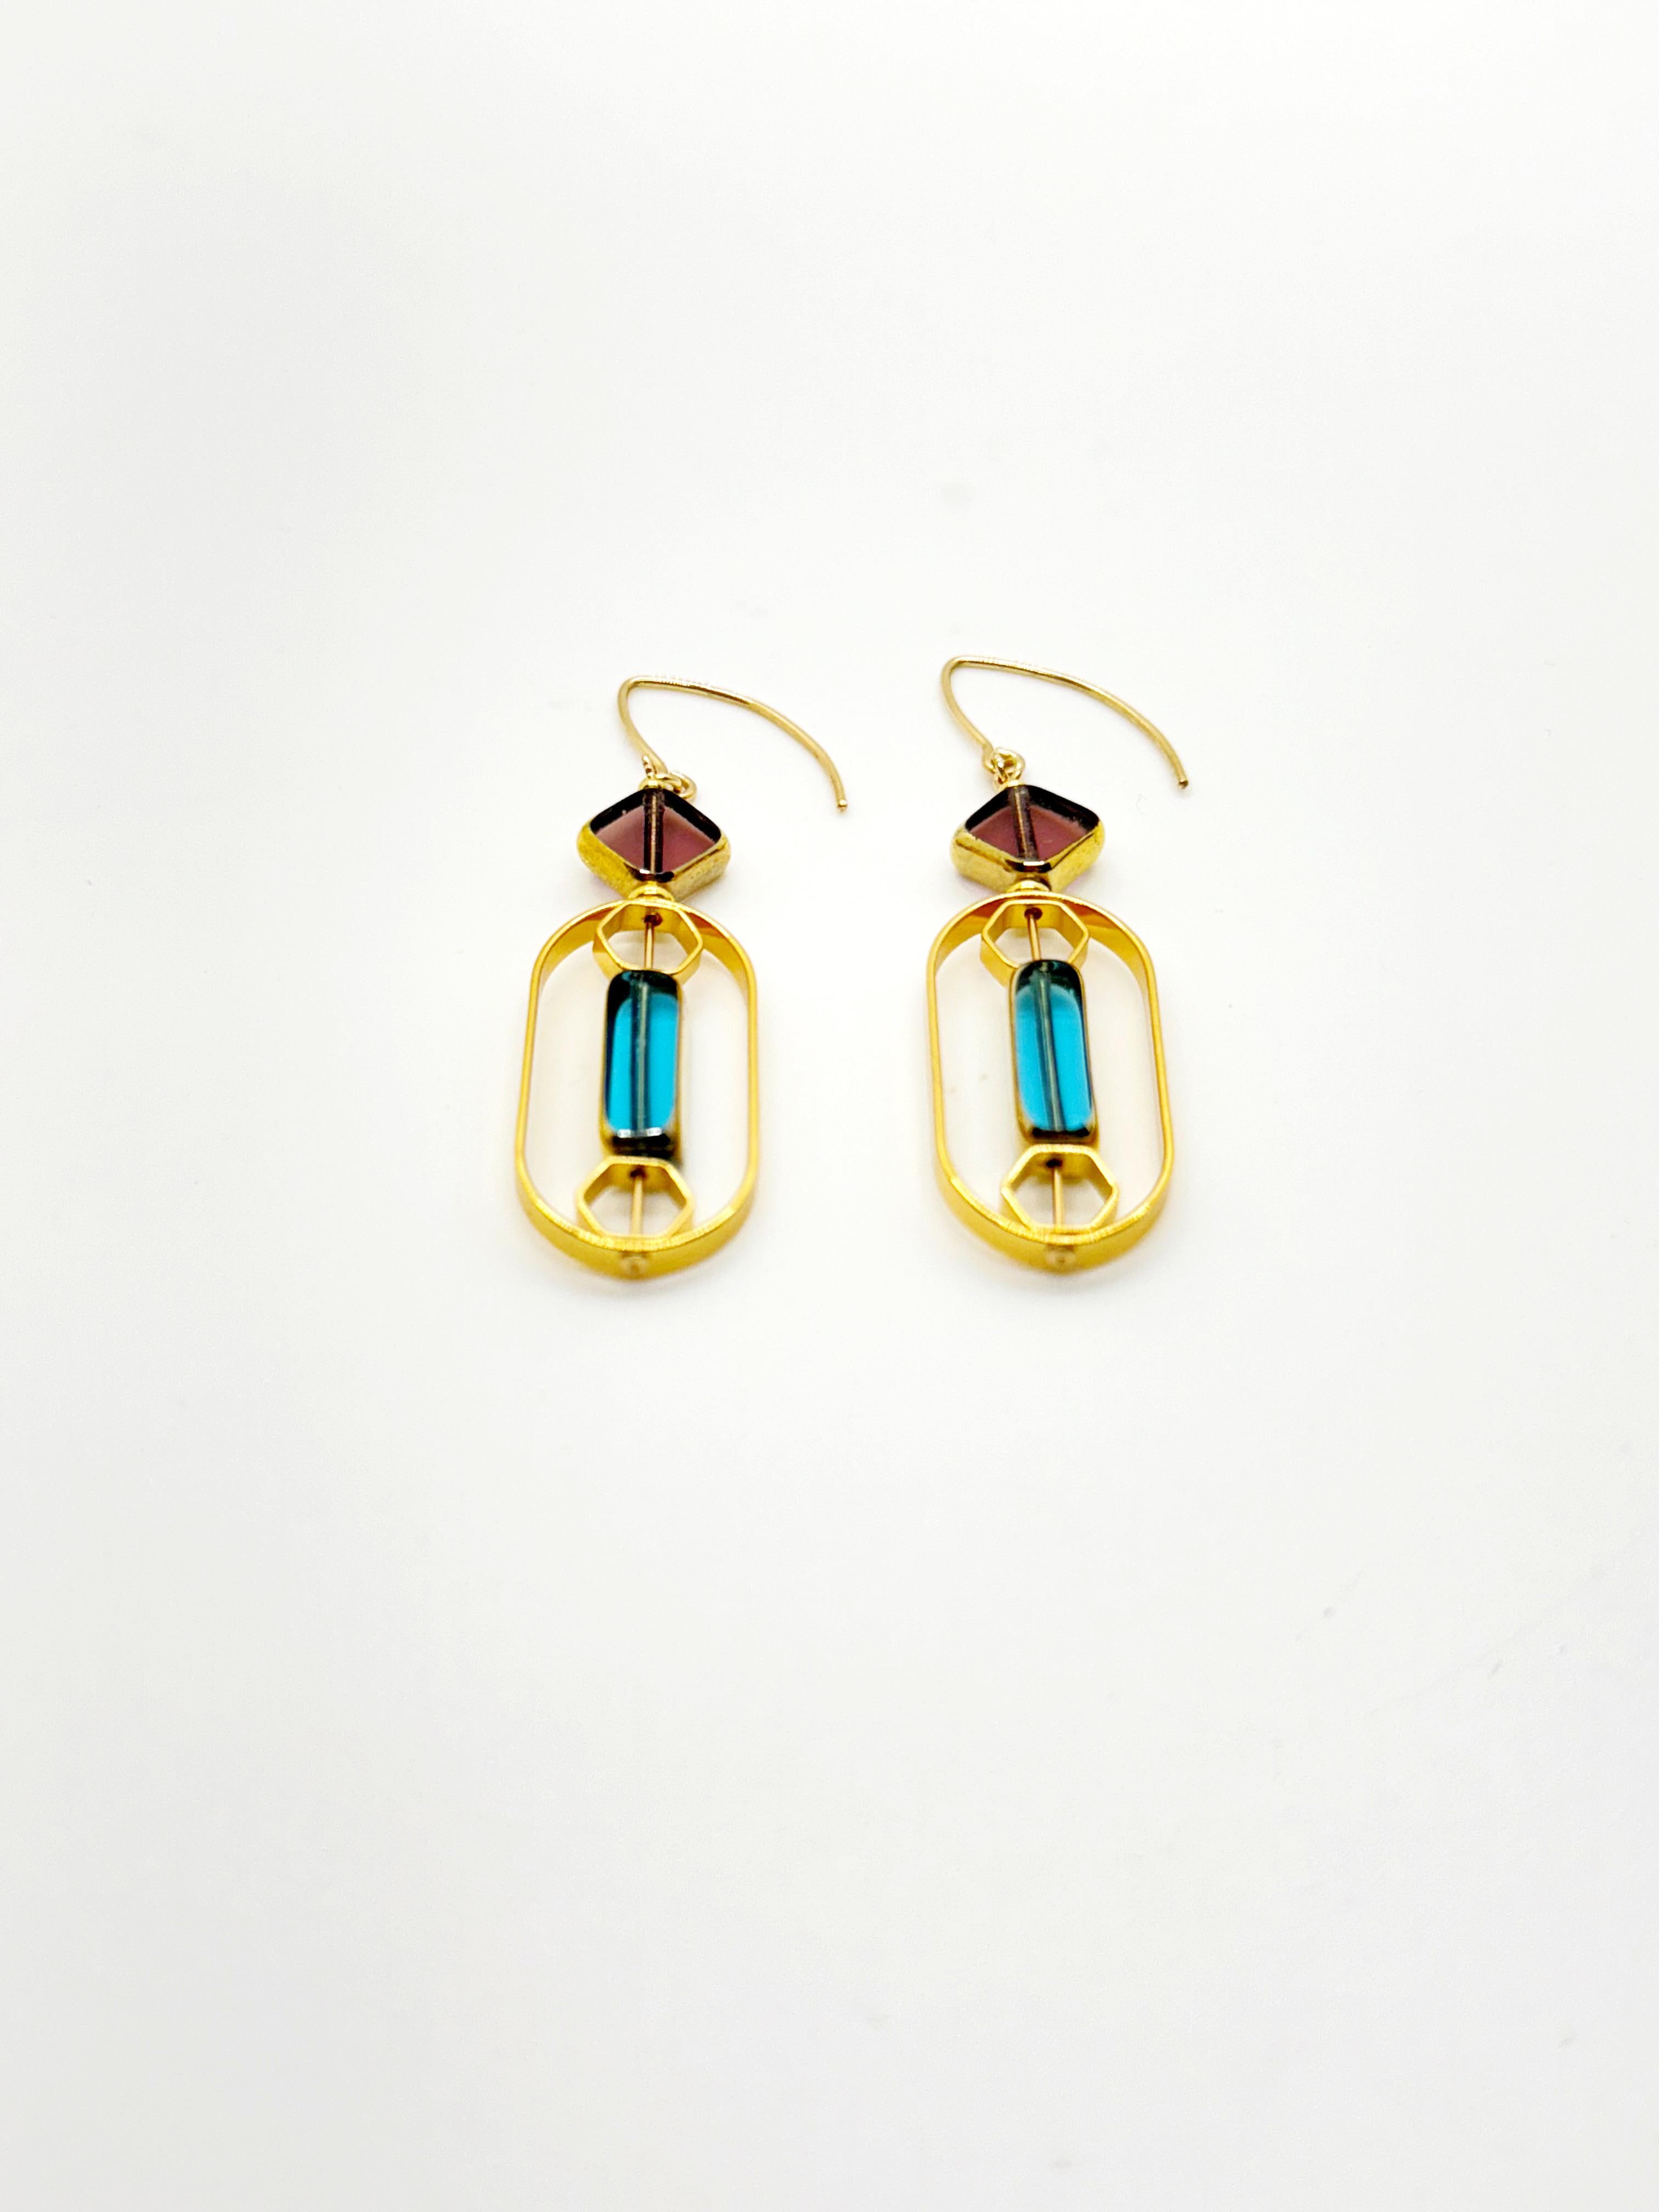 The earrings are lightweight and are made to rotate and reposition with movement.

The earrings consist of translucent burgundy and light blue new old stock vintage German glass beads that are framed with 24K gold. The beads were hand-pressed during